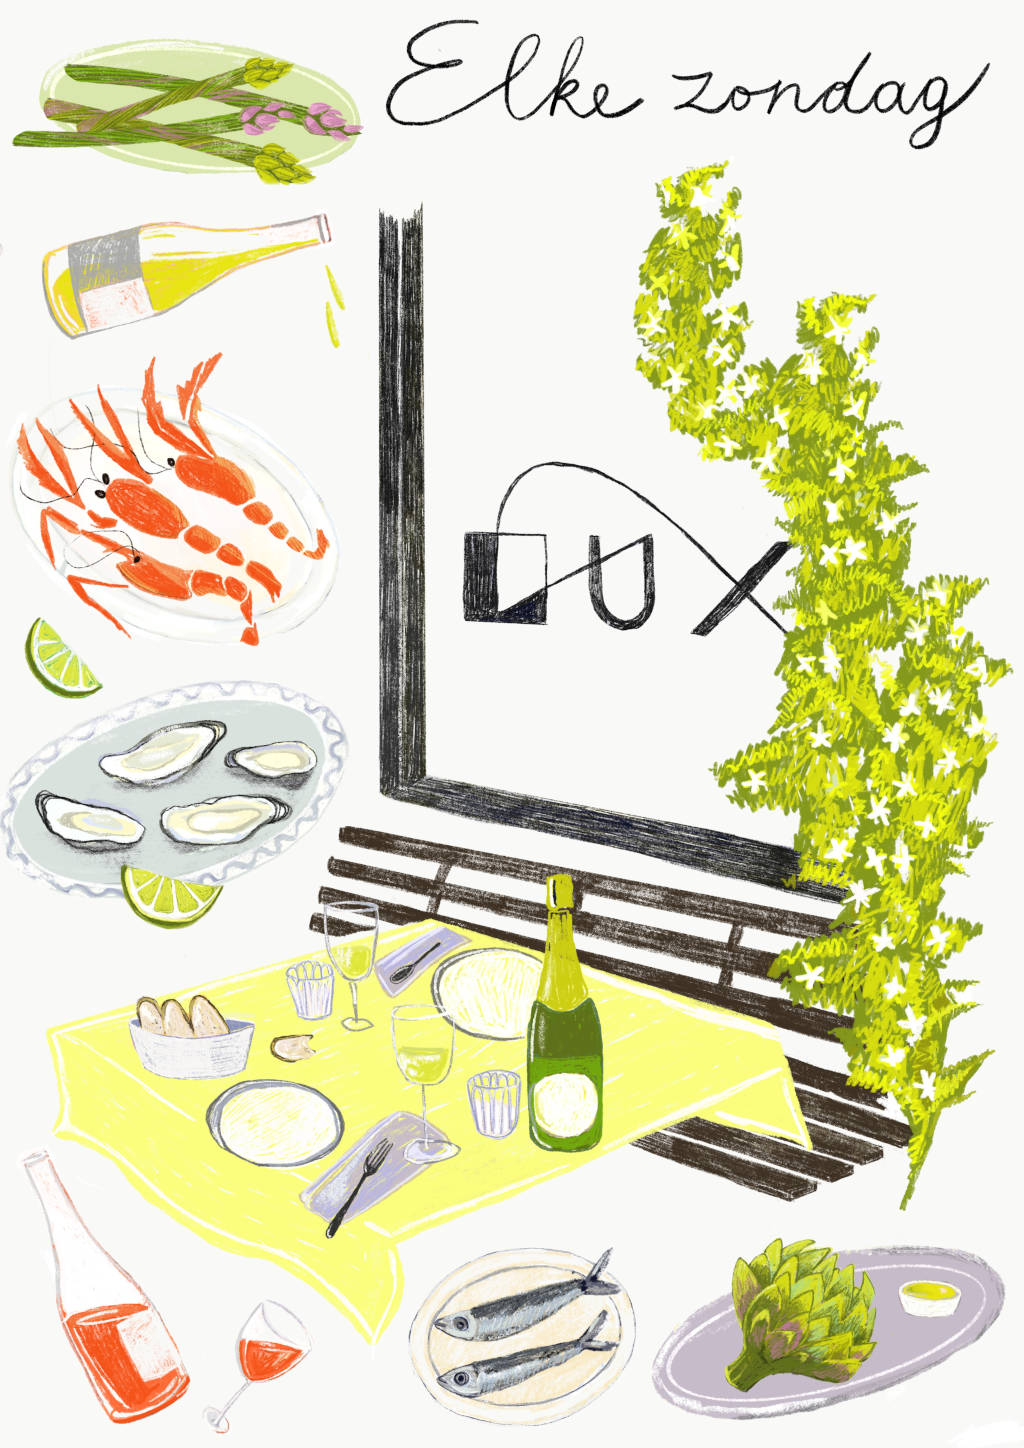 lunch at LUX every Sunday